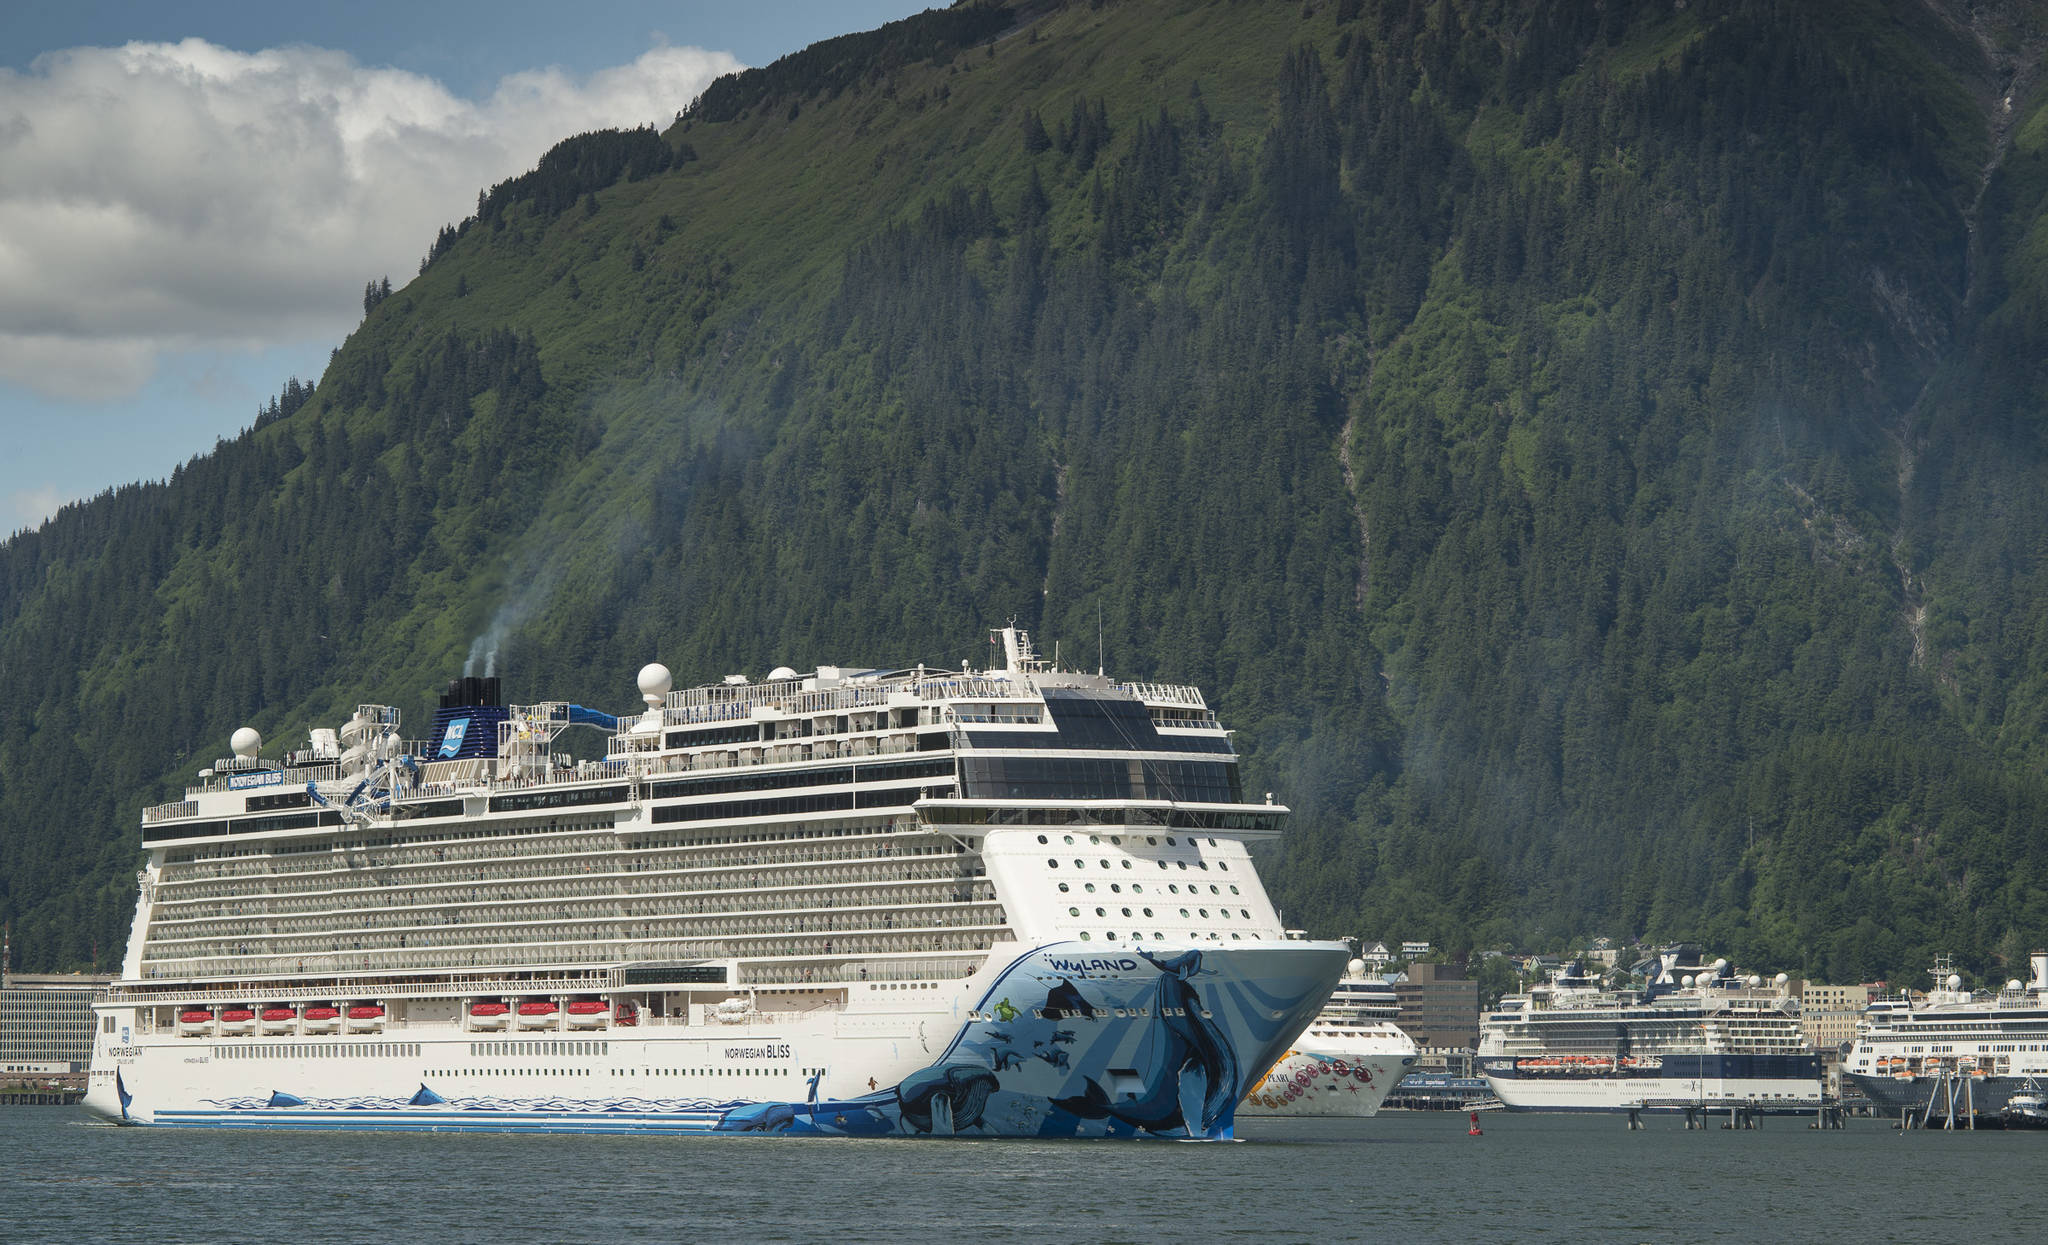 The Norwegian Bliss pulls out of Juneau’s downtown harbor on Tuesday, June 12, 2018. Norwegian Cruise Lines recently offered to donate $2 million to the City and Borough of Juneau to help alleviate the economic impact of the pandemic-related pause on cruises. On Monday evening, city officials declined the donation and asked the company to redirect the money to the Juneau Community Foundation, a local charitable organization. (Michael Penn /Juneau Empire File)